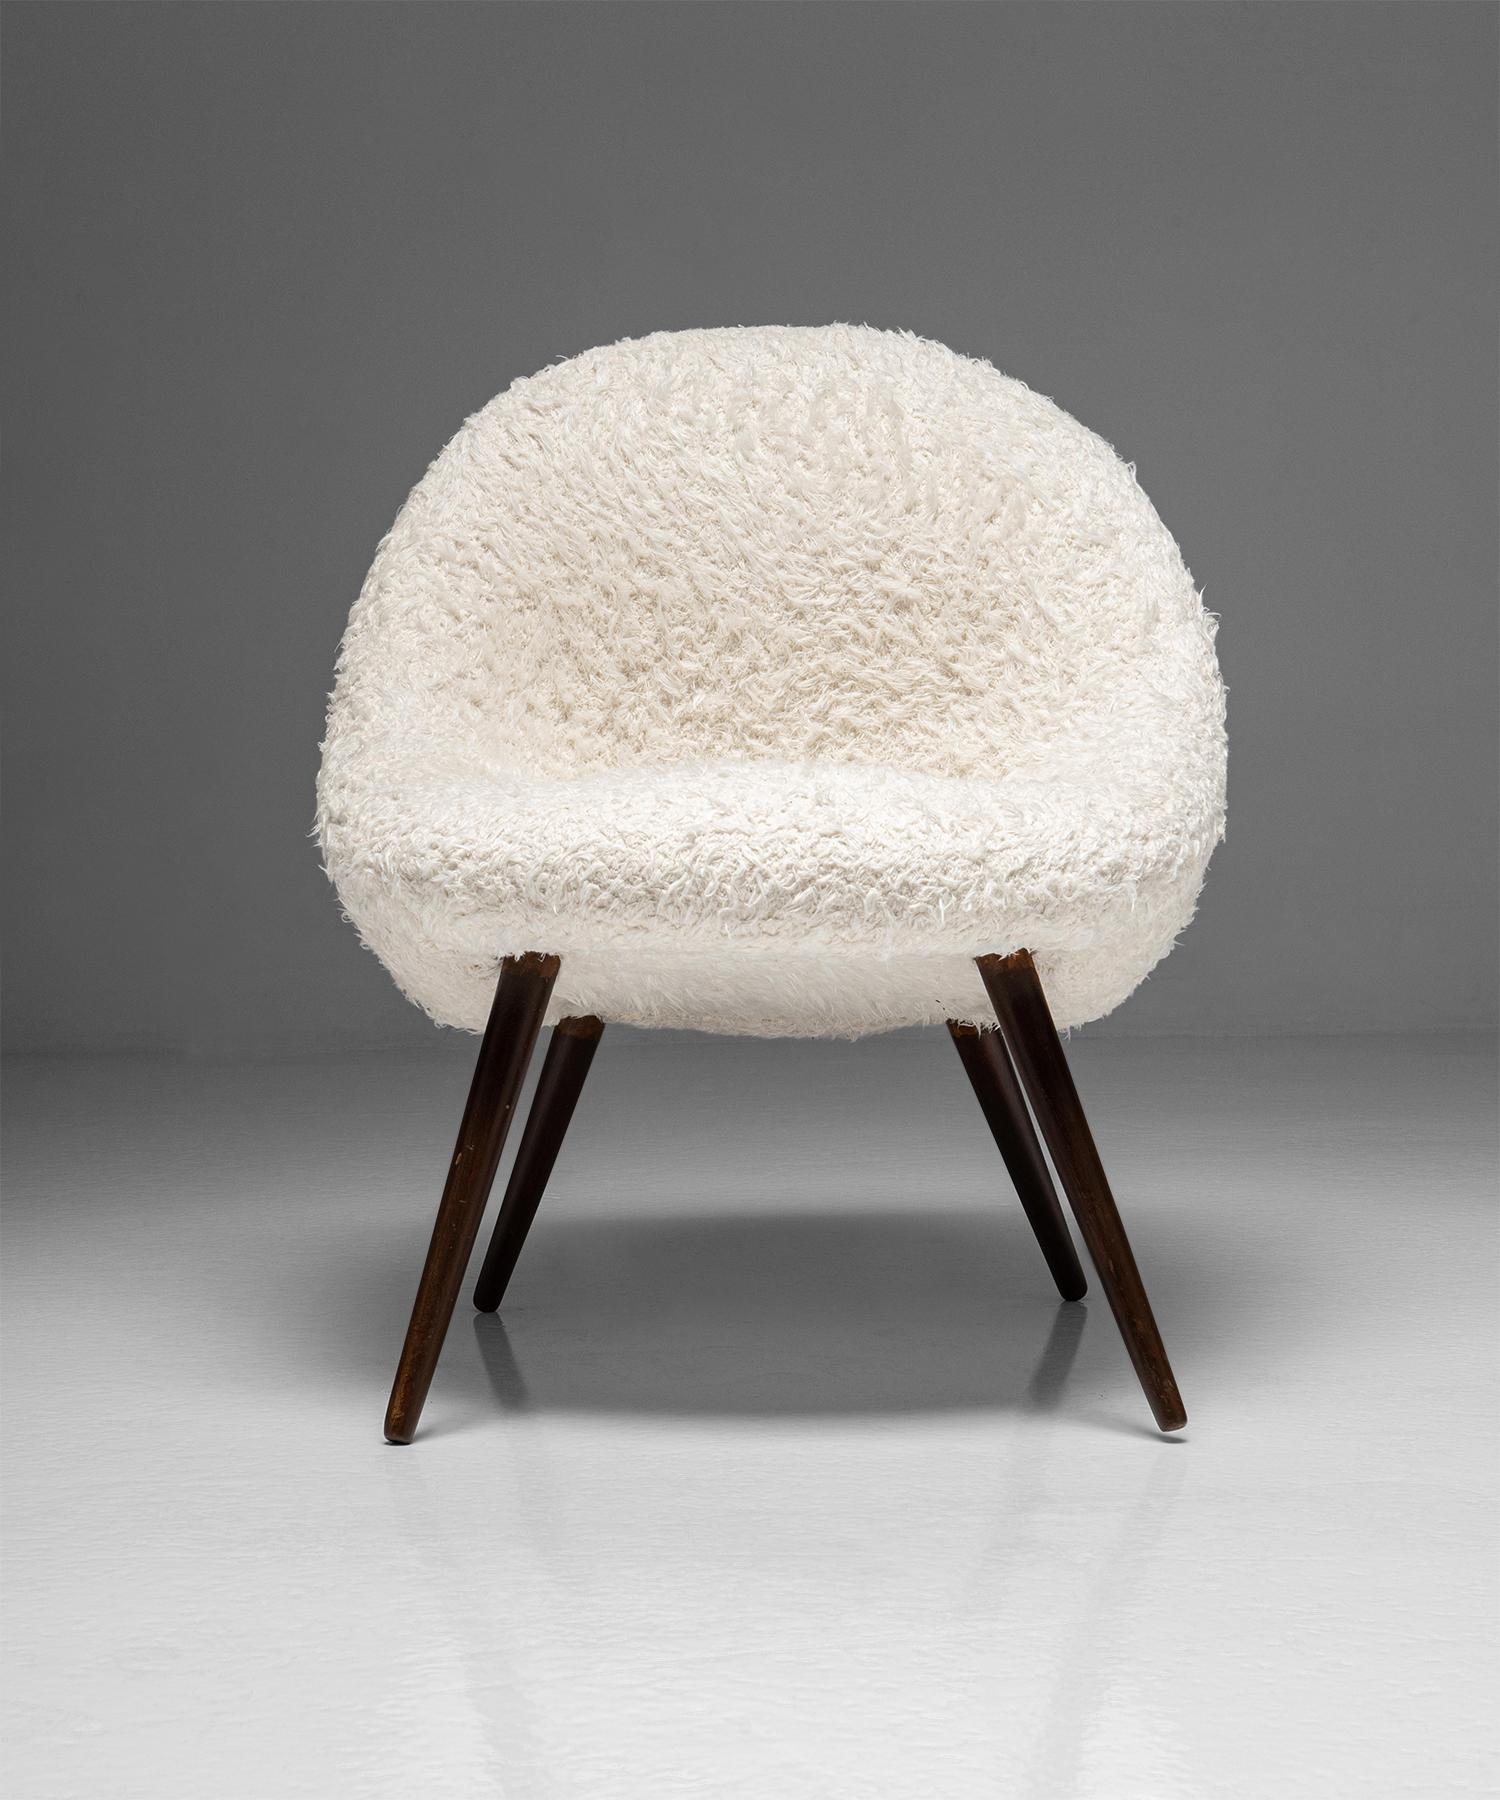 France Circa 1960

Newly upholstered in faux sheepskin, with curved “egg” shape on splayed and tapered legs.

Measures: 24”W x 17”D x 28.5”H w/ 17.5” seat.